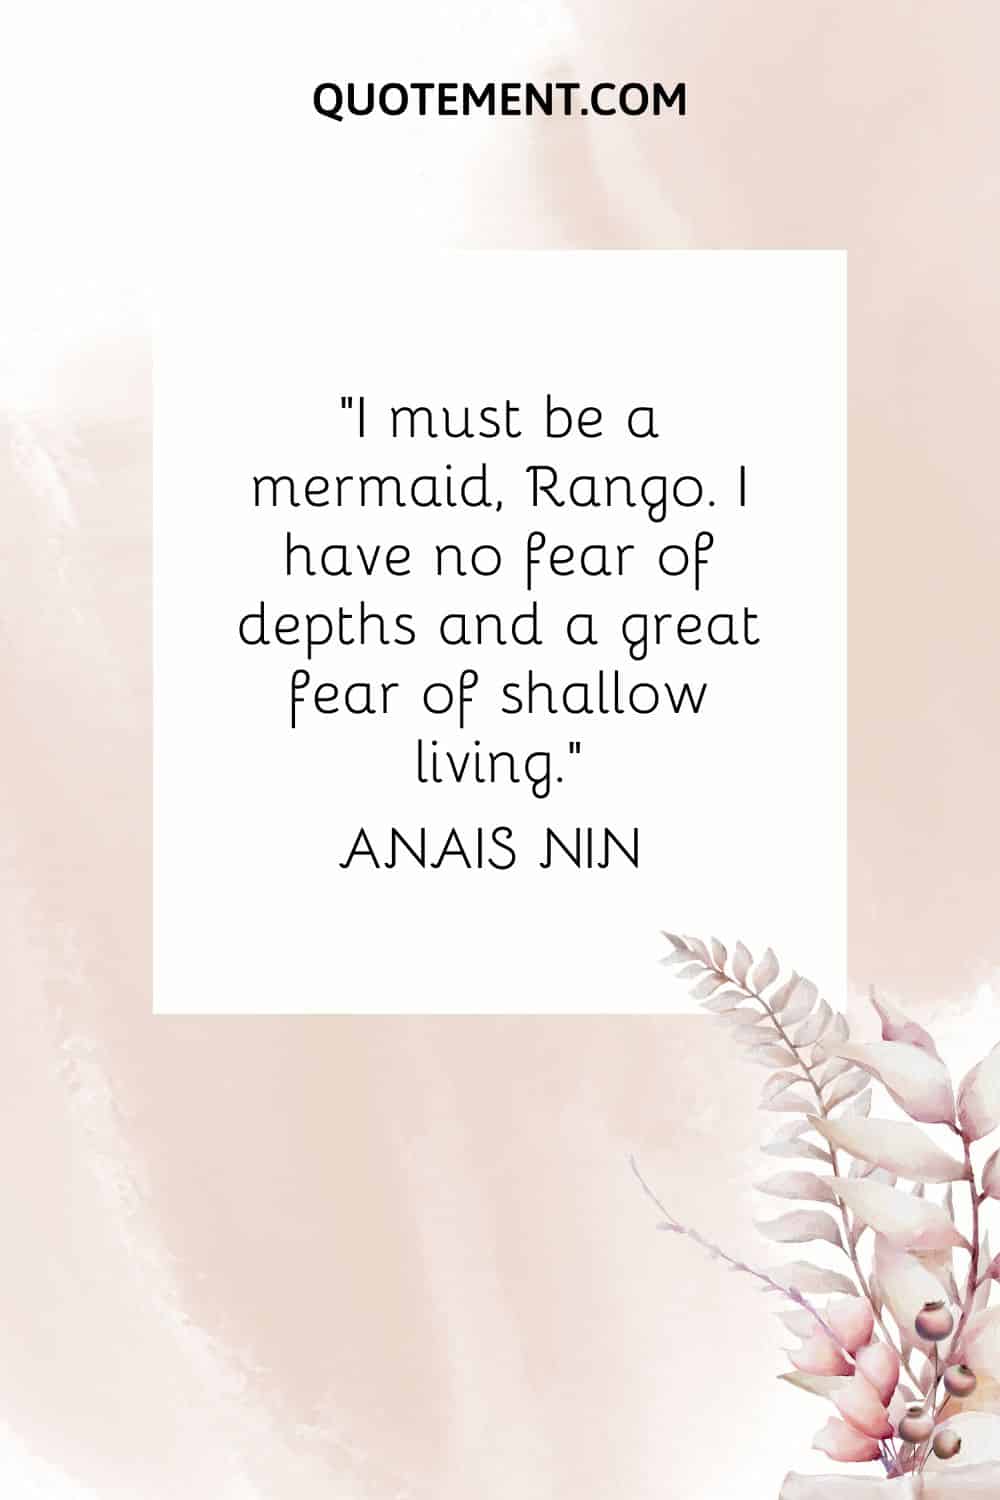 “I must be a mermaid, Rango. I have no fear of depths and a great fear of shallow living.” — Anais Nin